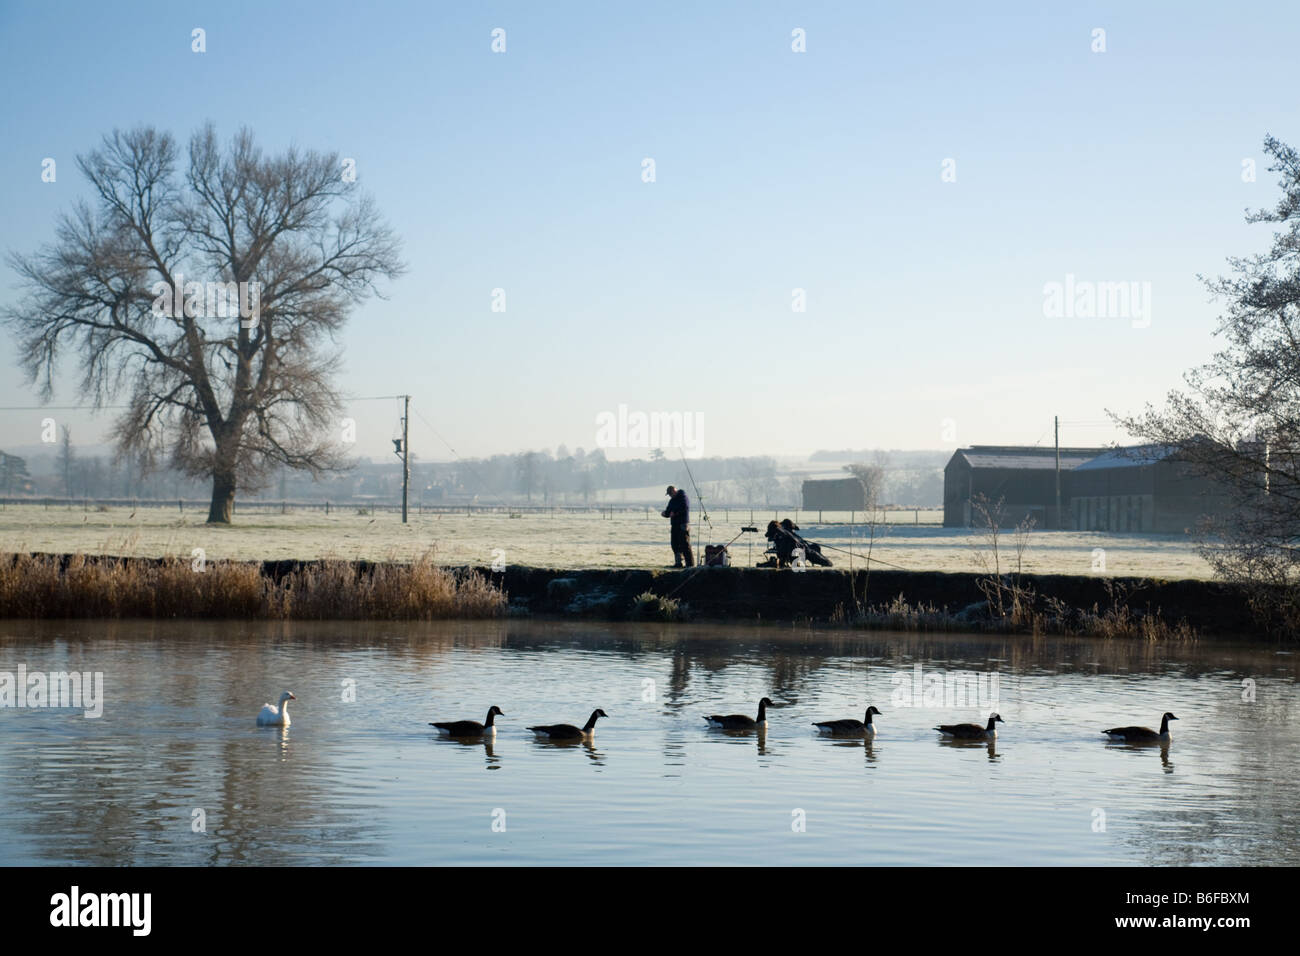 An early morning angler and geese, The river Thames, Wallingford, Oxfordshire Stock Photo